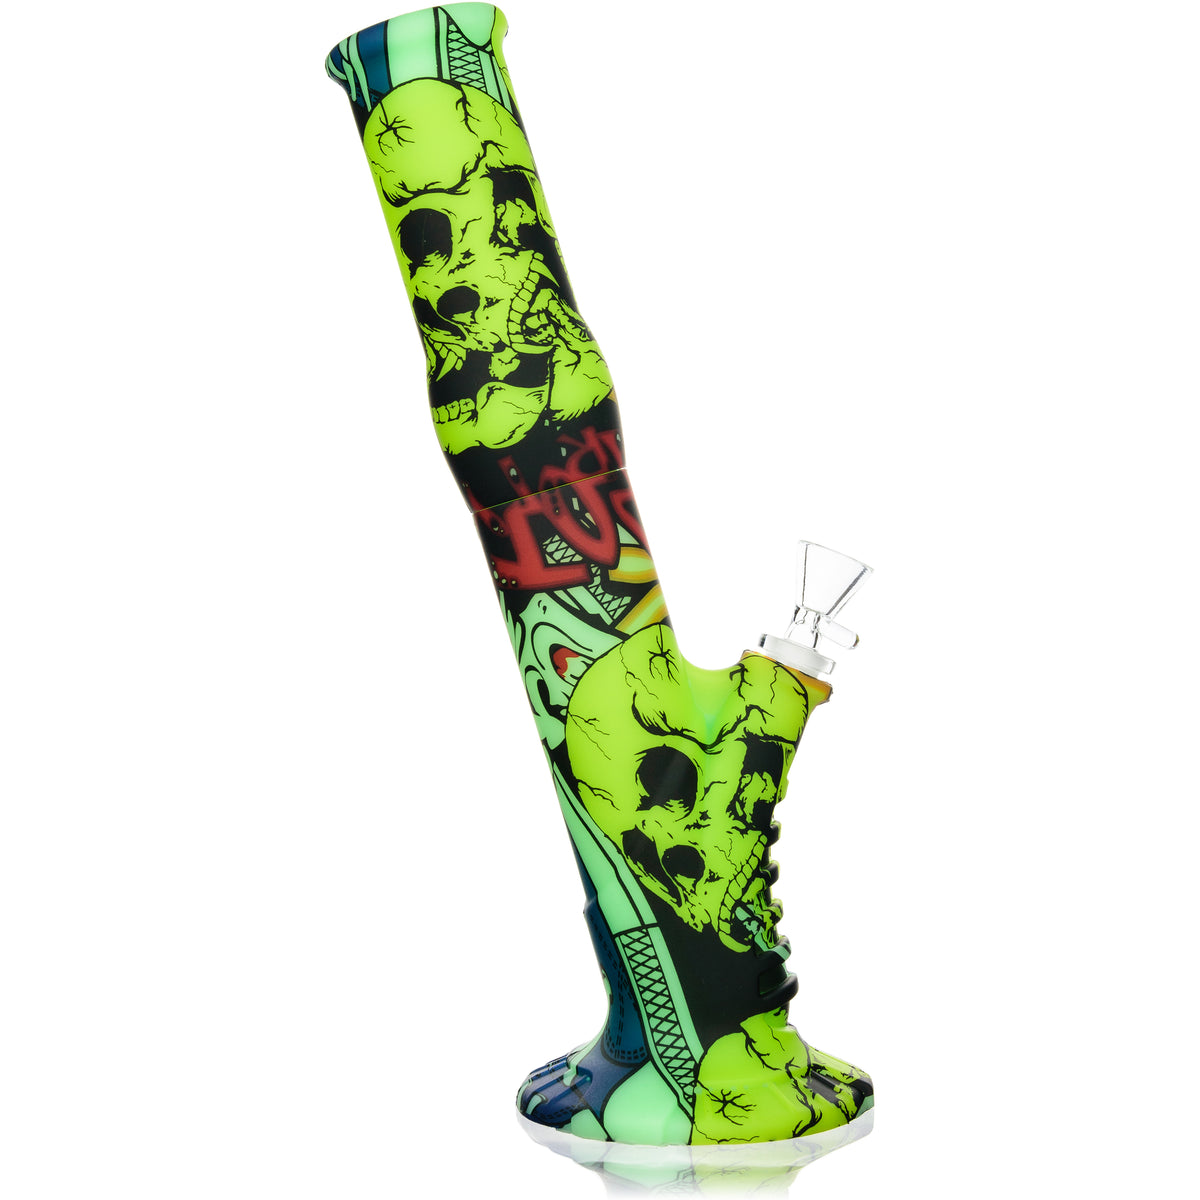 13" Silicone Bong w/ Comic, Cash or Camouflage Graphics - BKRY Inc.